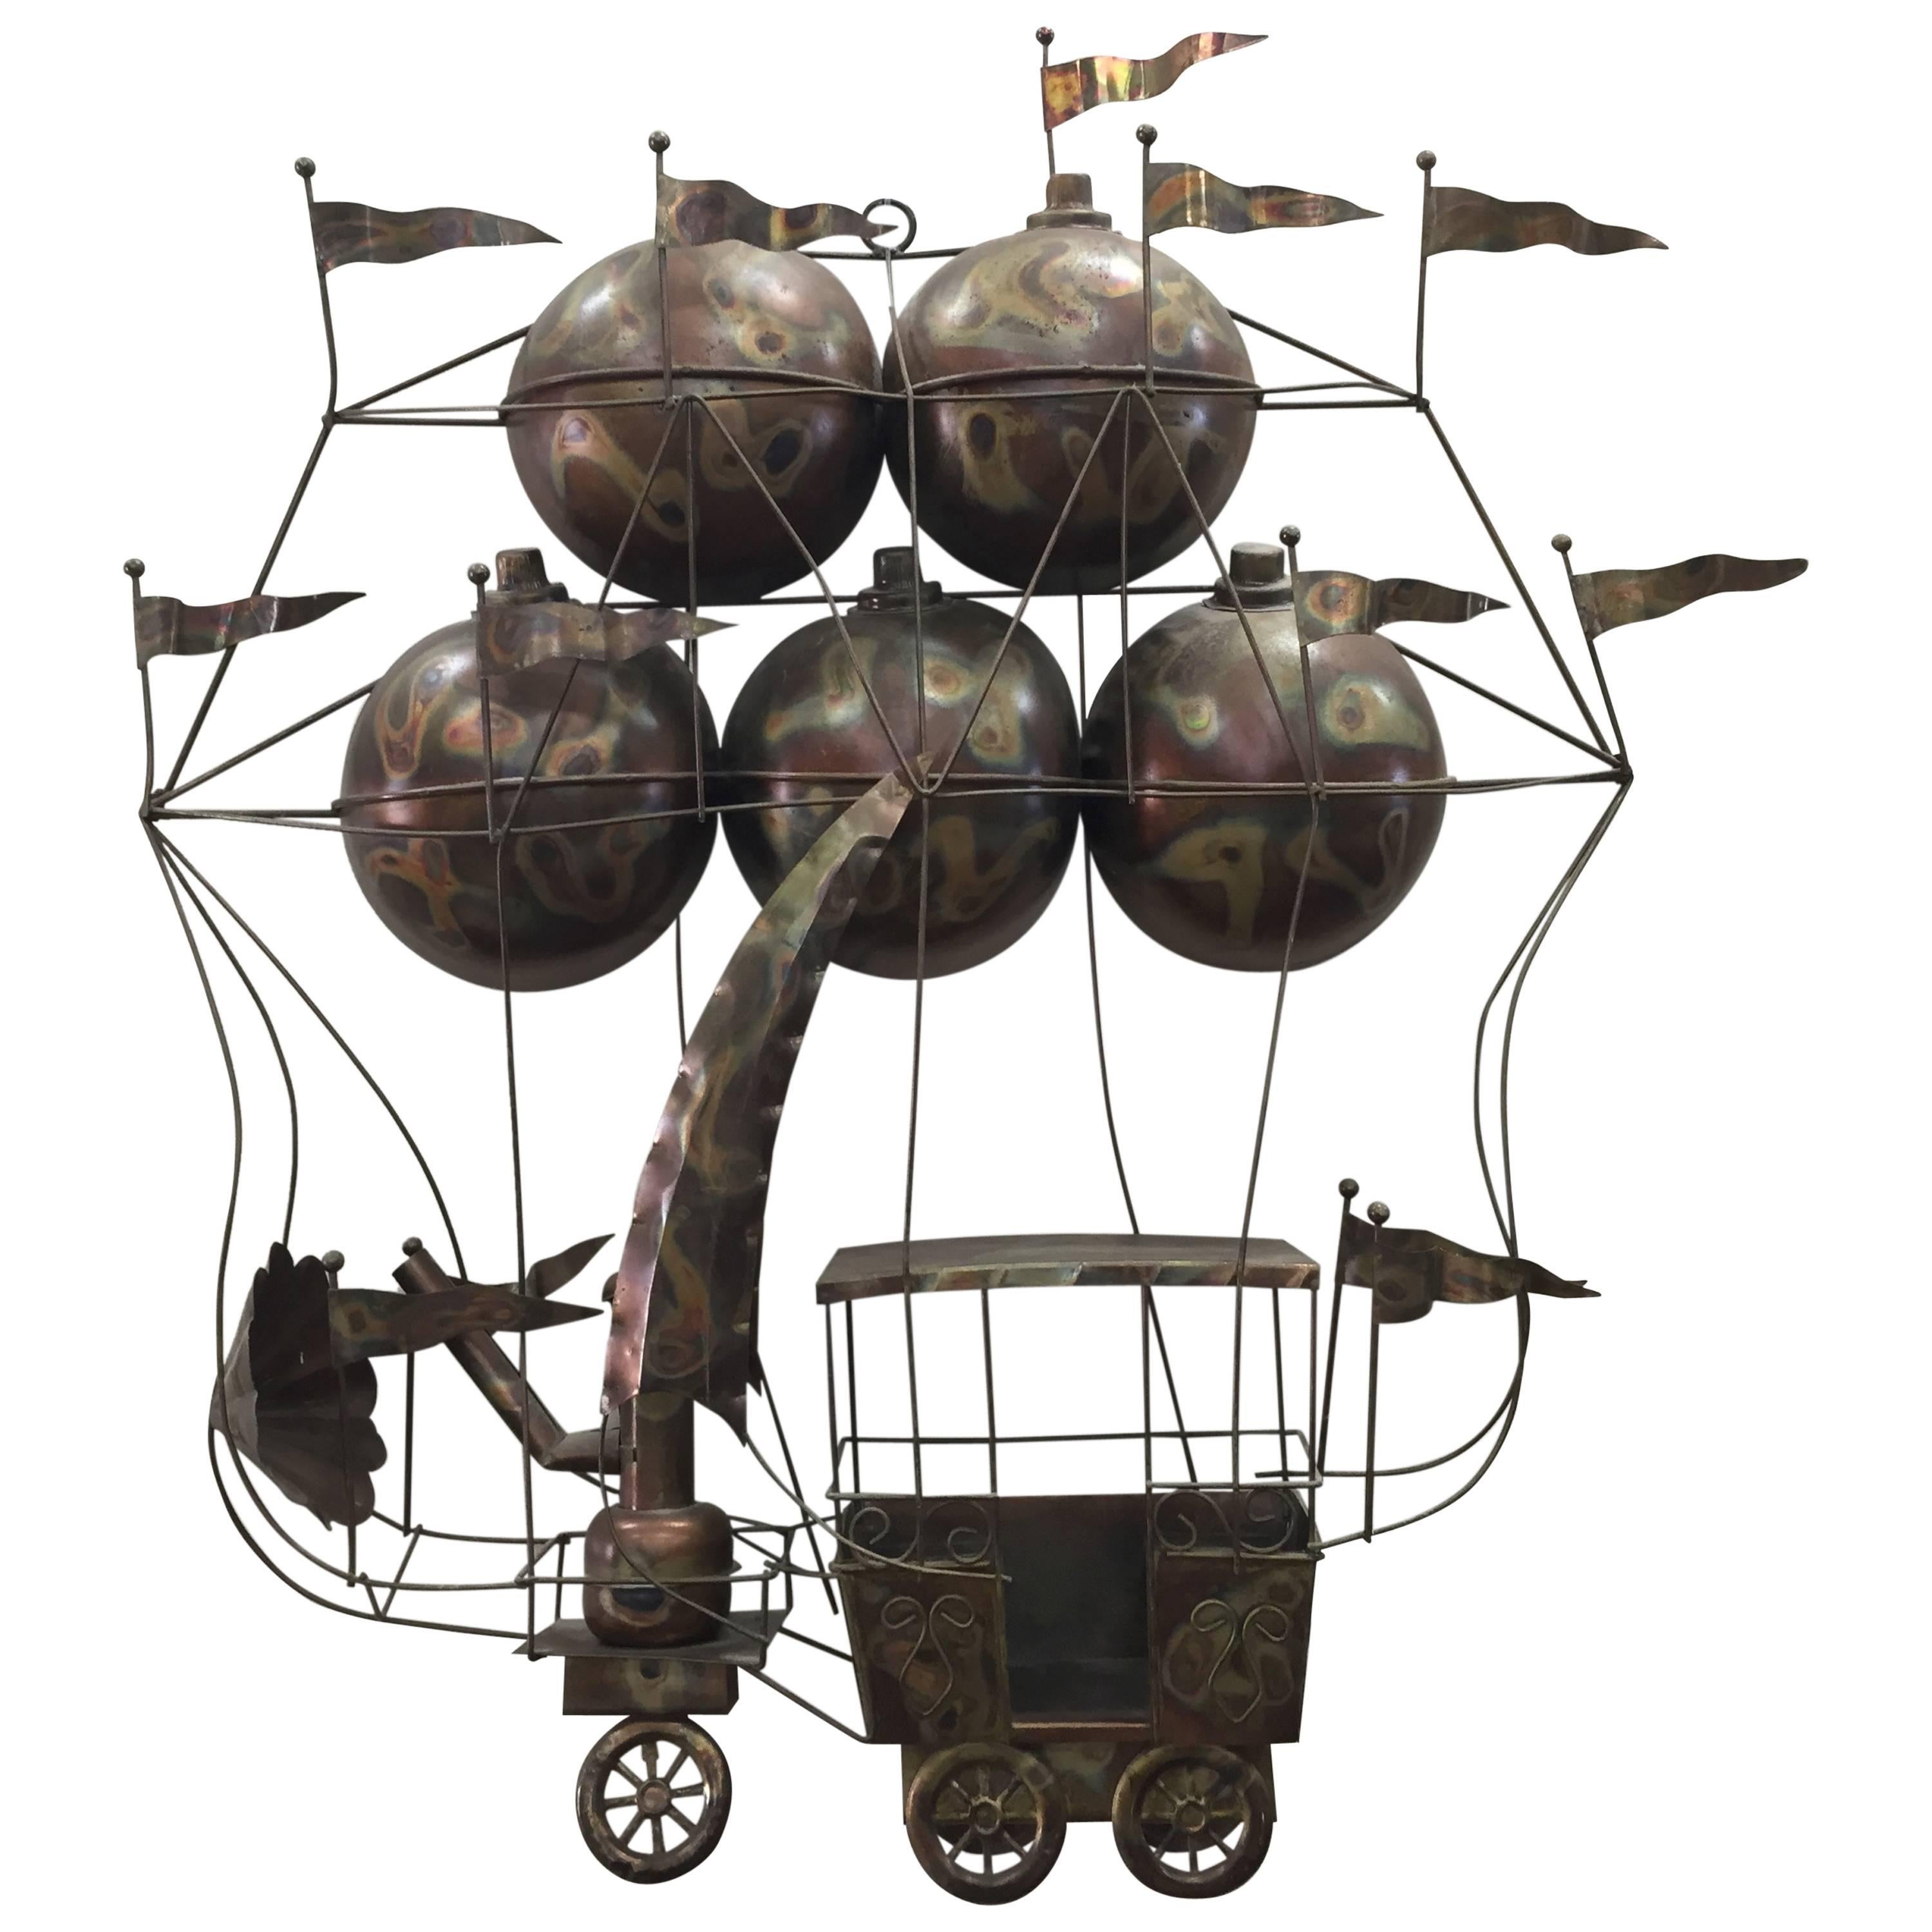 Curtis Jere Fantasy Hot Air Balloon Wall Sculpture For Sale